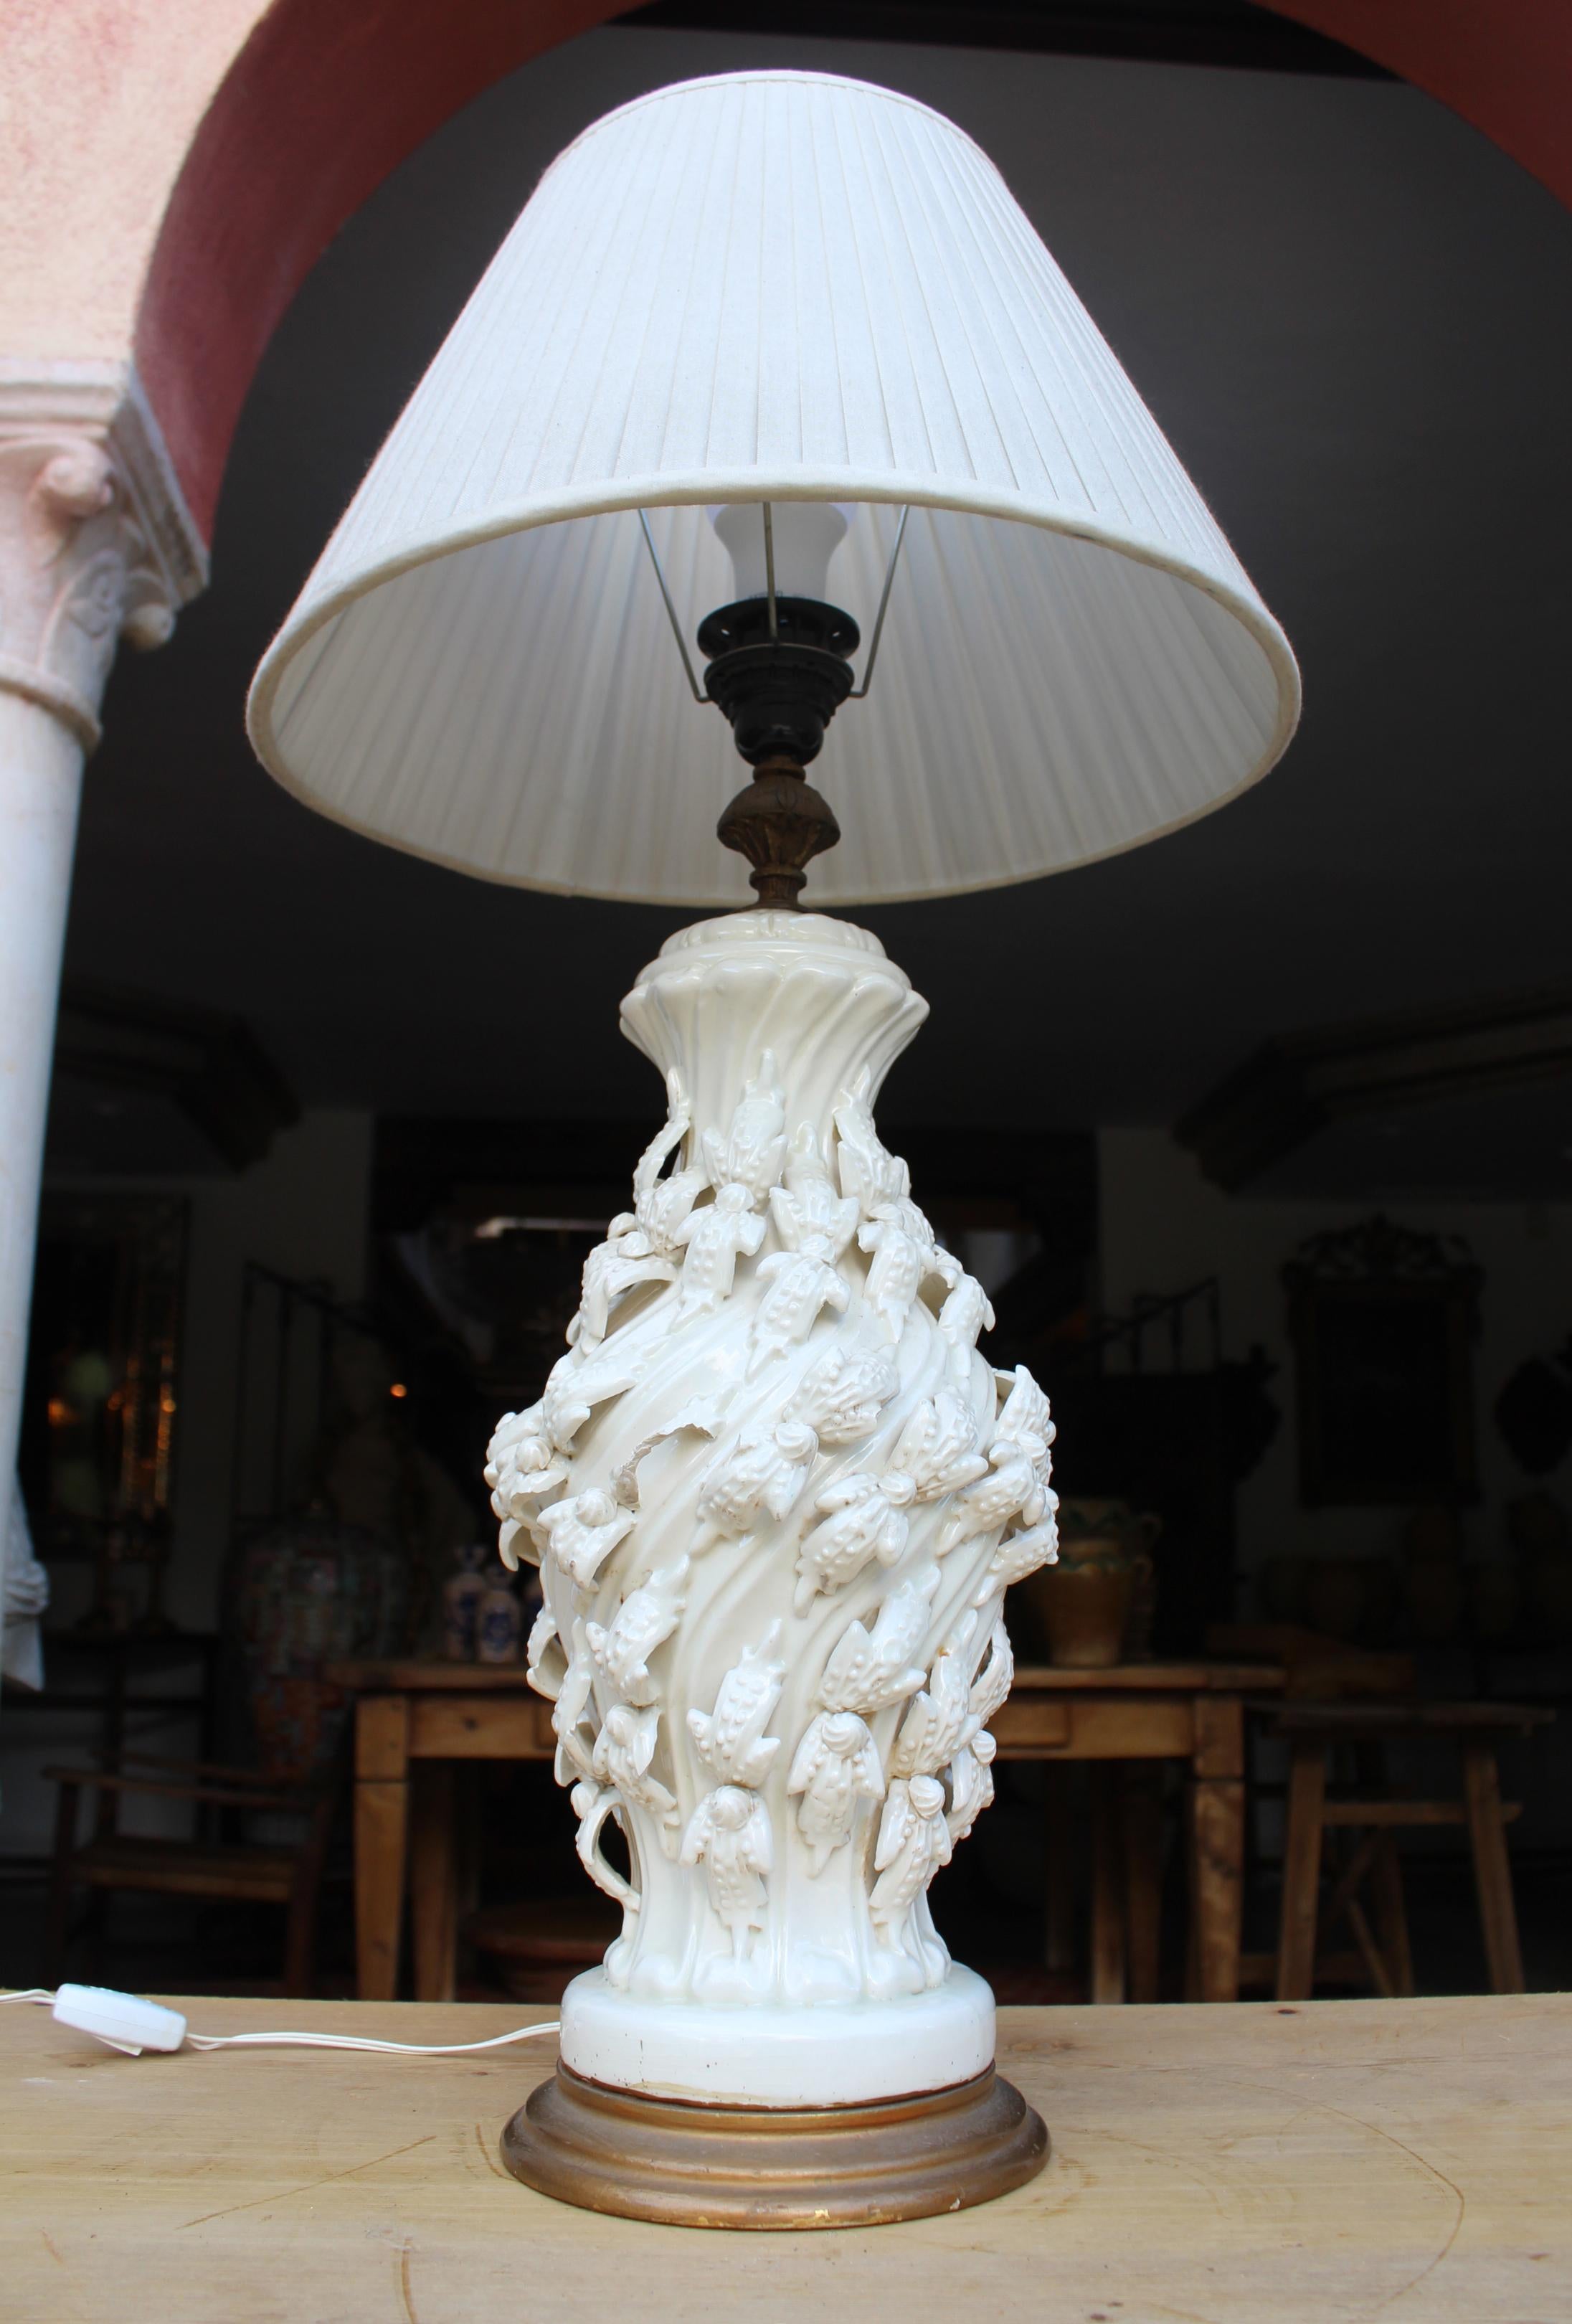 1970s Spanish white glazed Manises ceramic white table lamp with wooden base; typical of Valencia. Decorated with flowers.